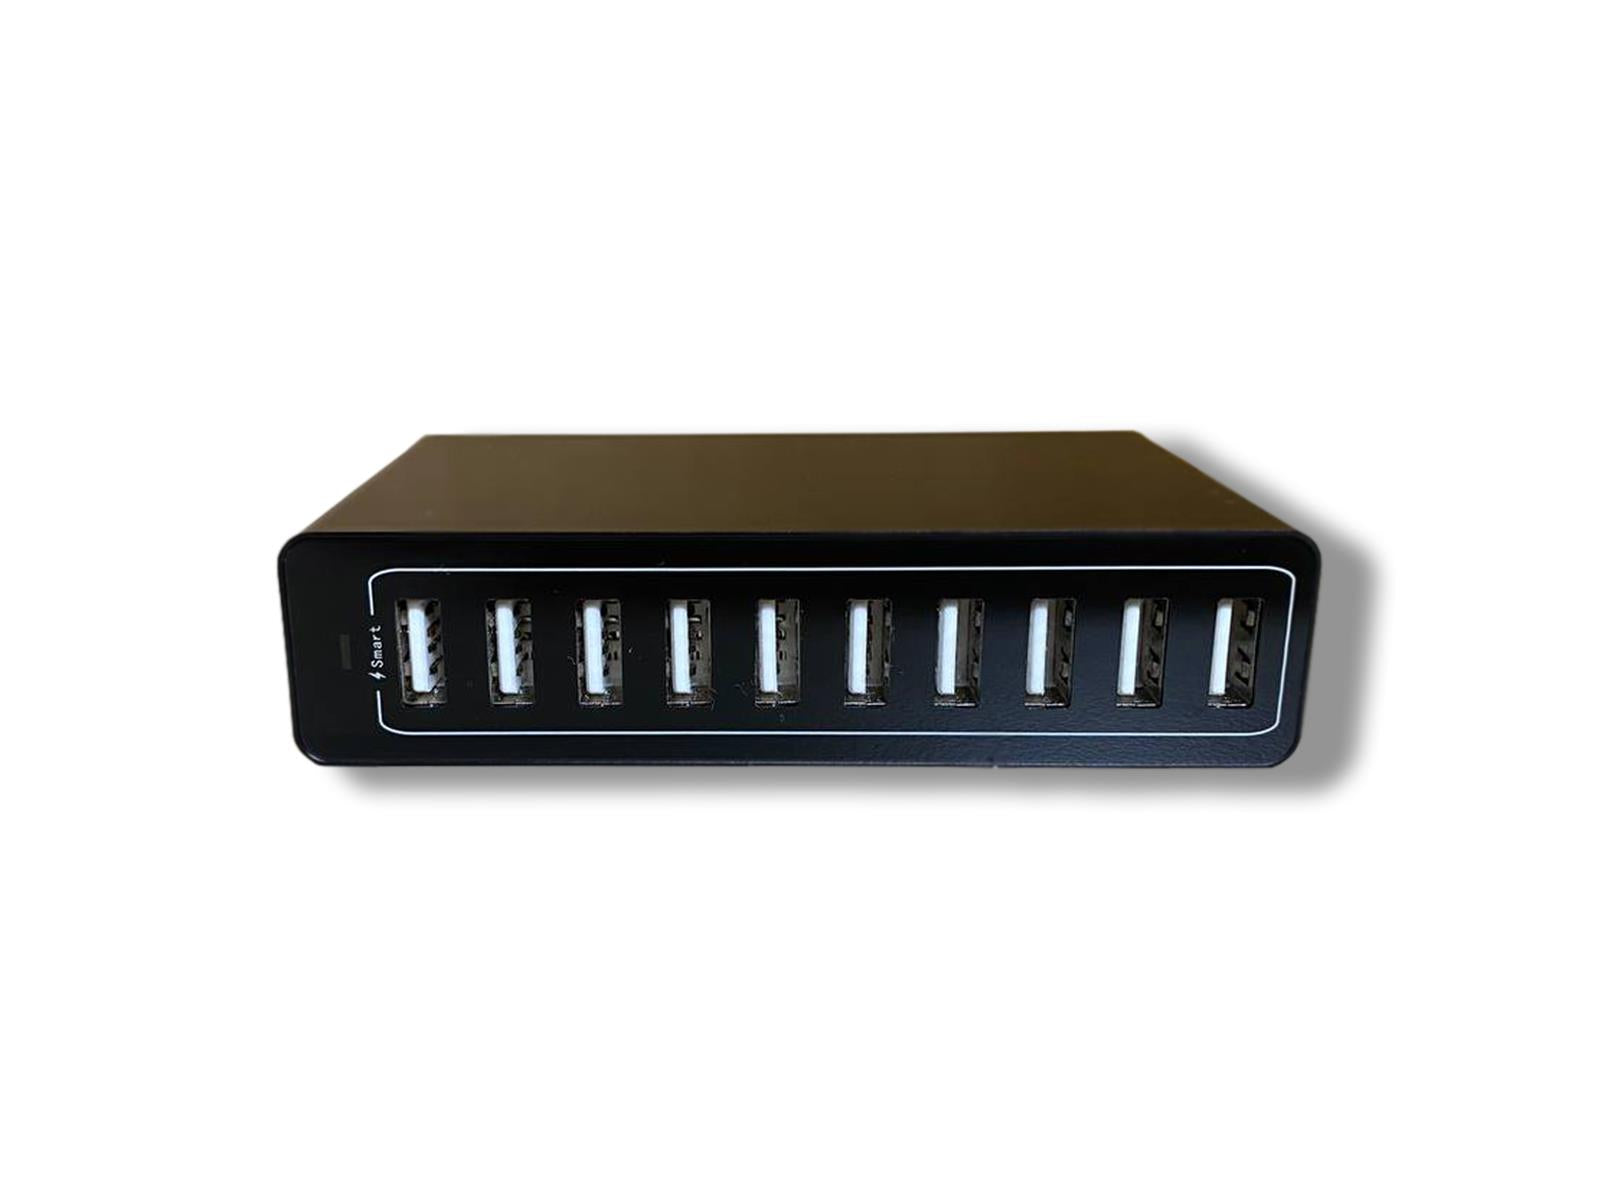 Image shows the Tekeir 10 Port USB Charging Hub on its side